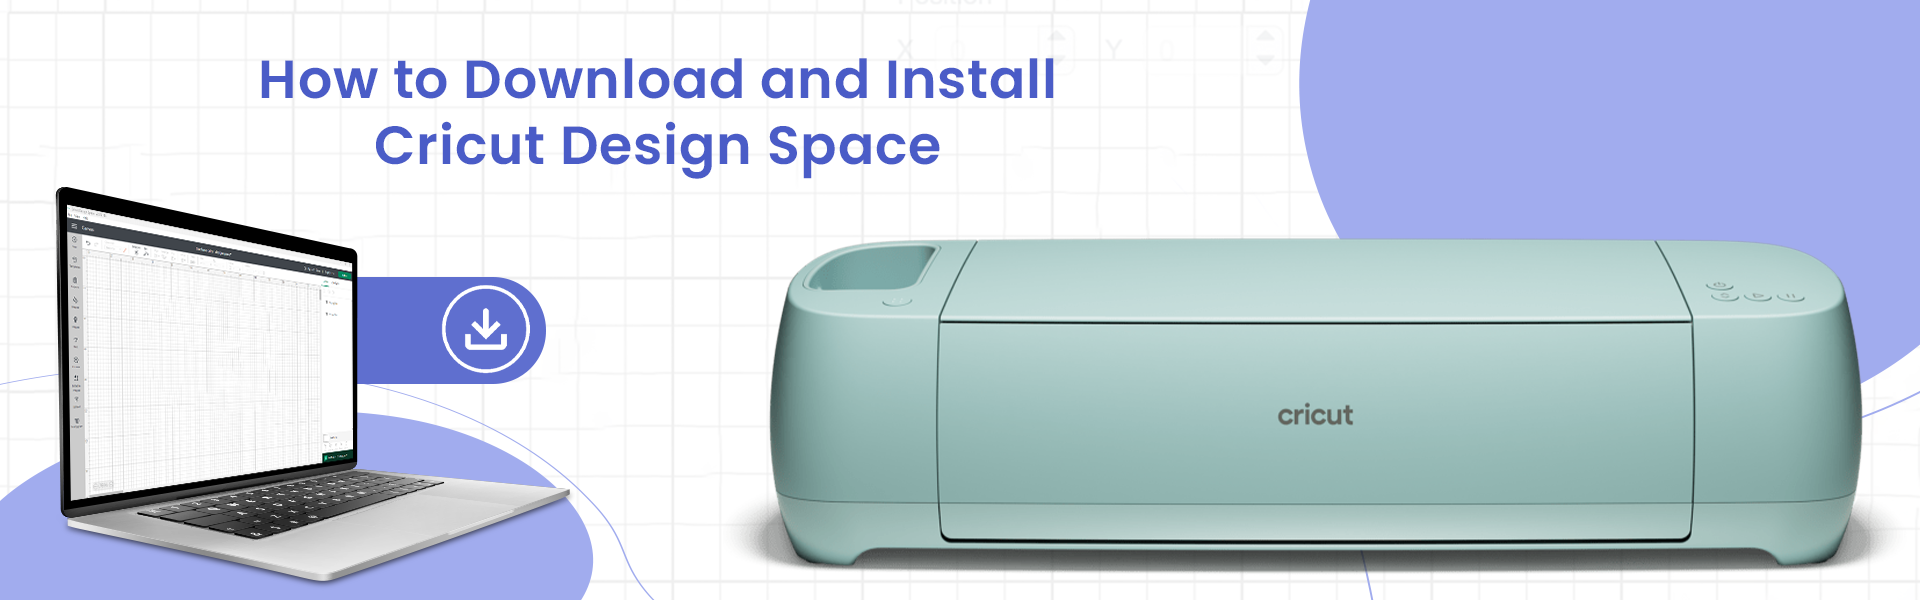 How-To-Download-And-Install-Cricut-Design-Space